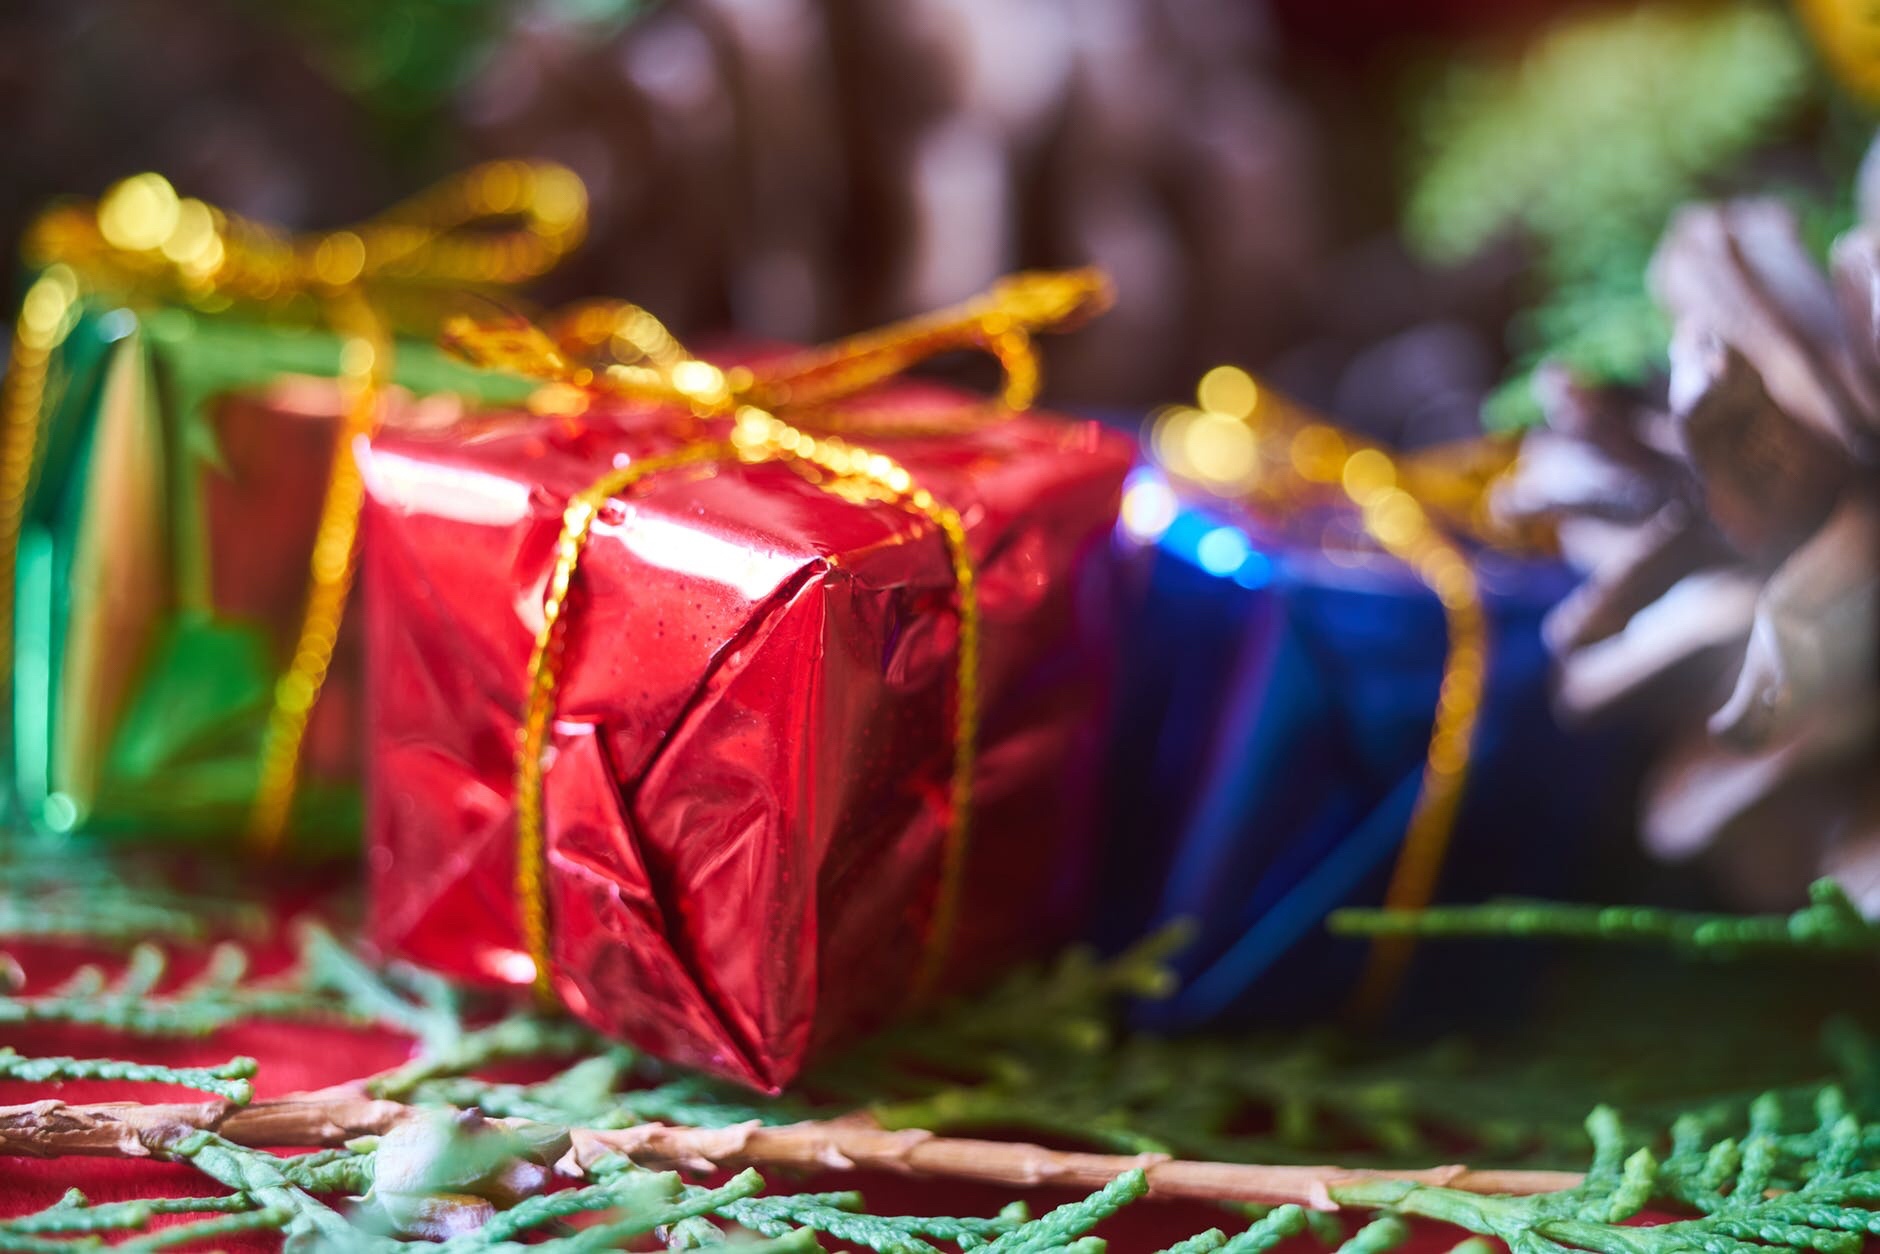 The Giving of Gifts as Part of Christmas - Part of Christmas is the giving of gifts and even receiving of gifts. Why do we give gifts as part of this Holiday tradition? 